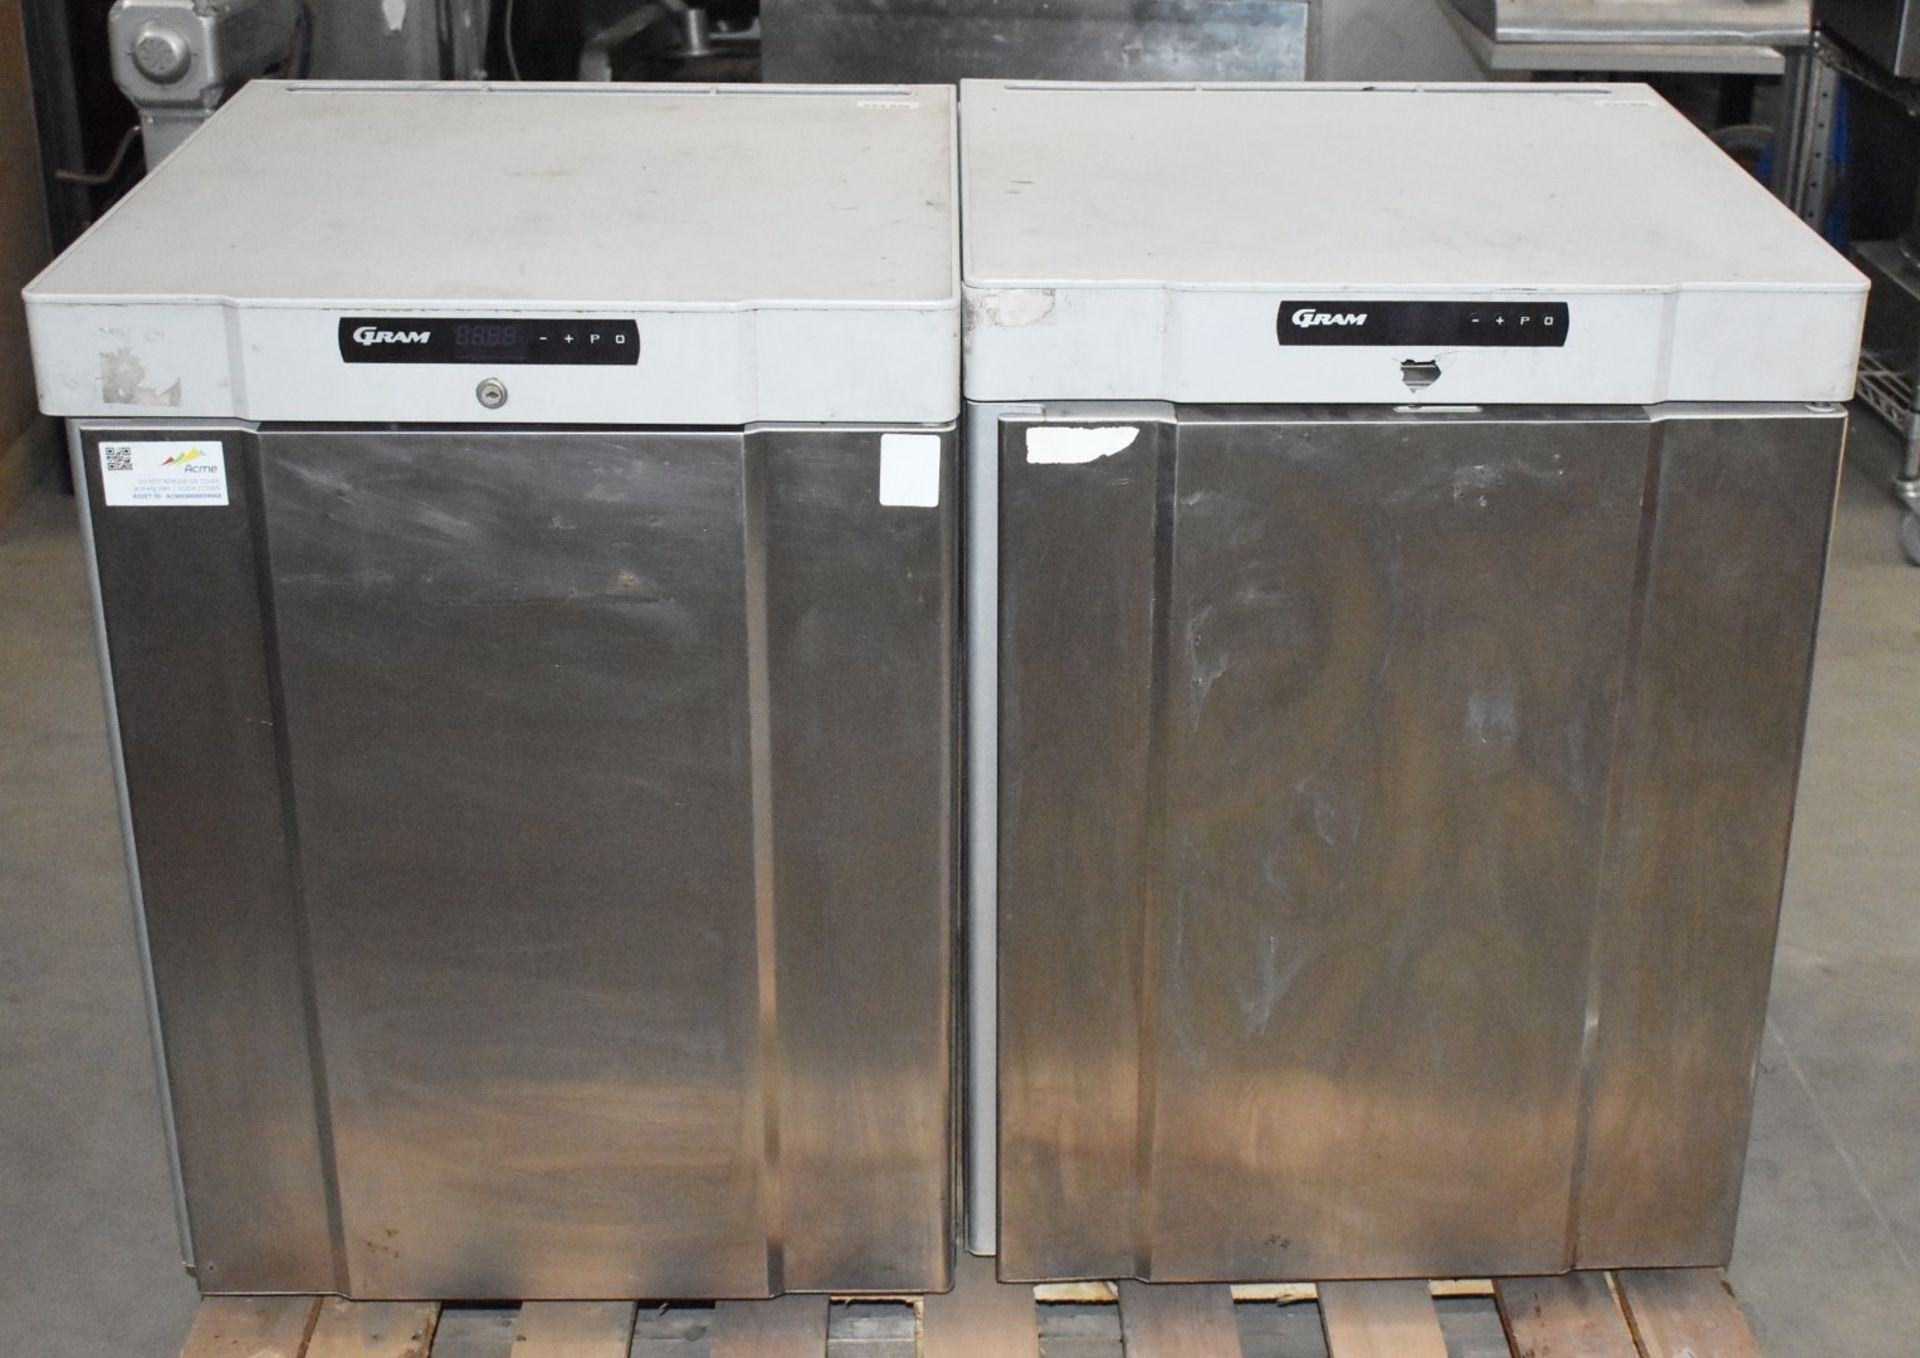 2 x Gram F 210 RG 3N 125 Ltr Undercounter Freezers - Recently Removed From a Restaurant